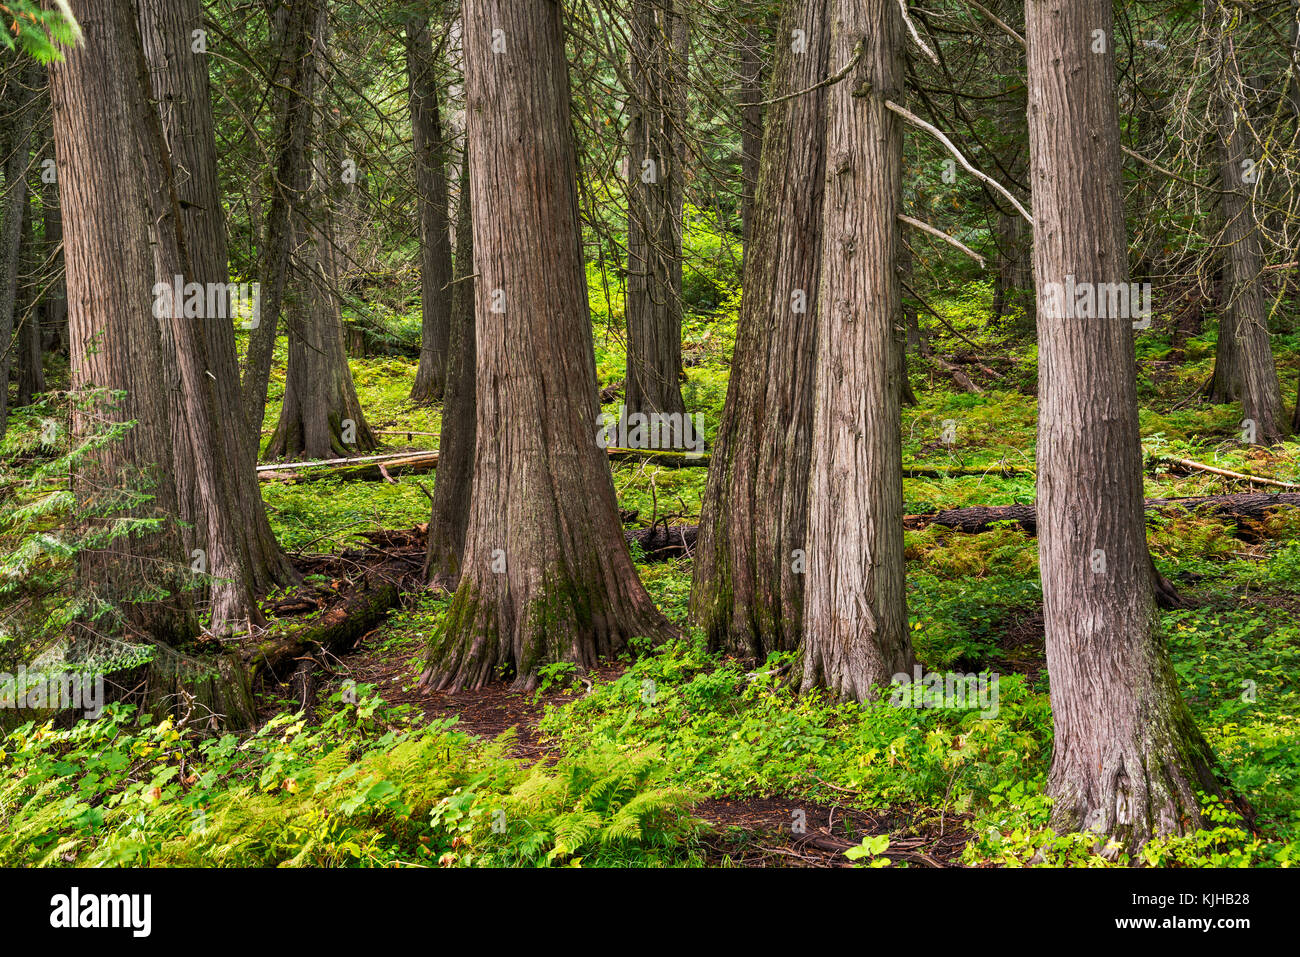 Red cedar trees at DeVoto Memorial Cedar Grove near Lolo Pass, MP 165 on Northwest Passage Scenic Byway, Clearwater National Forest, Idaho, USA Stock Photo